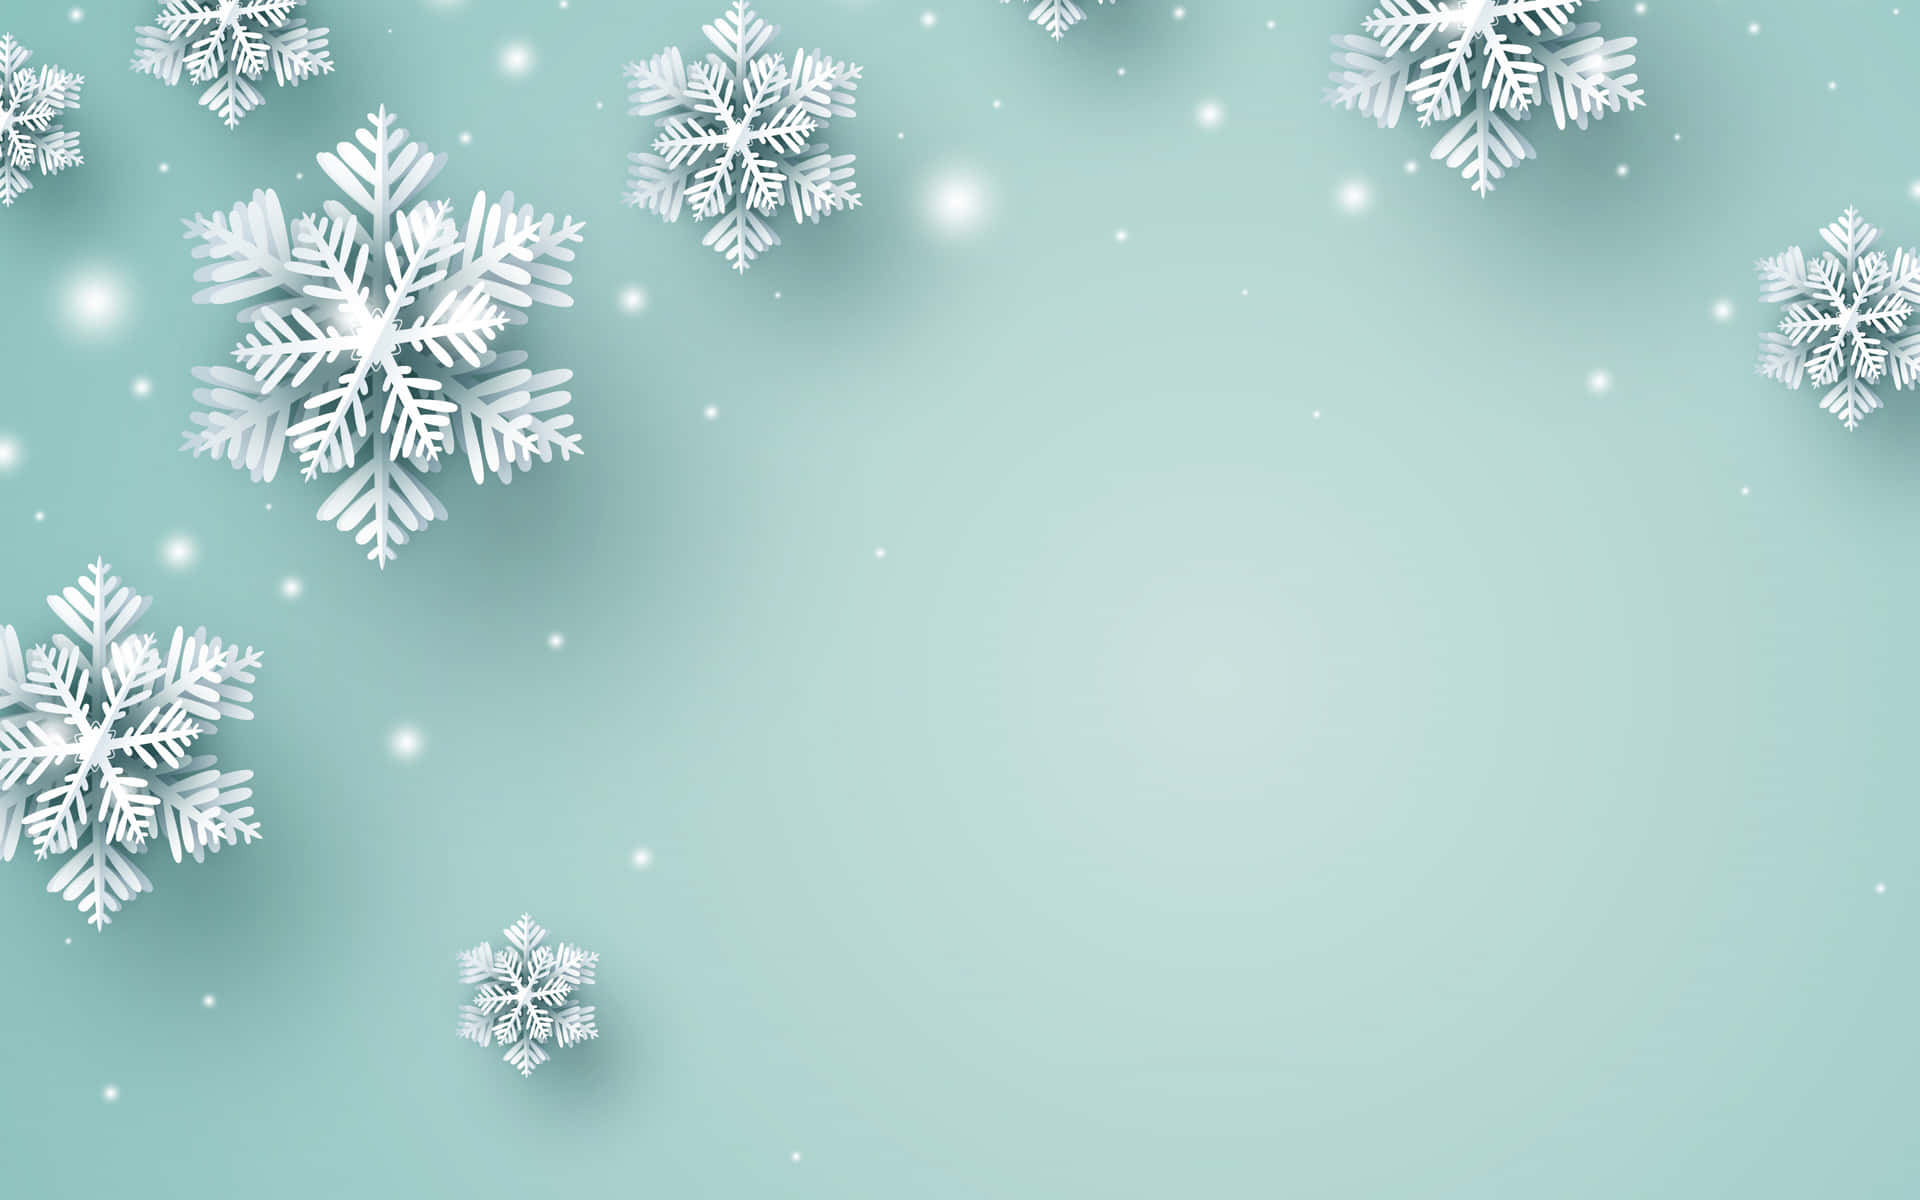 3D White Crystal Snowflakes Background